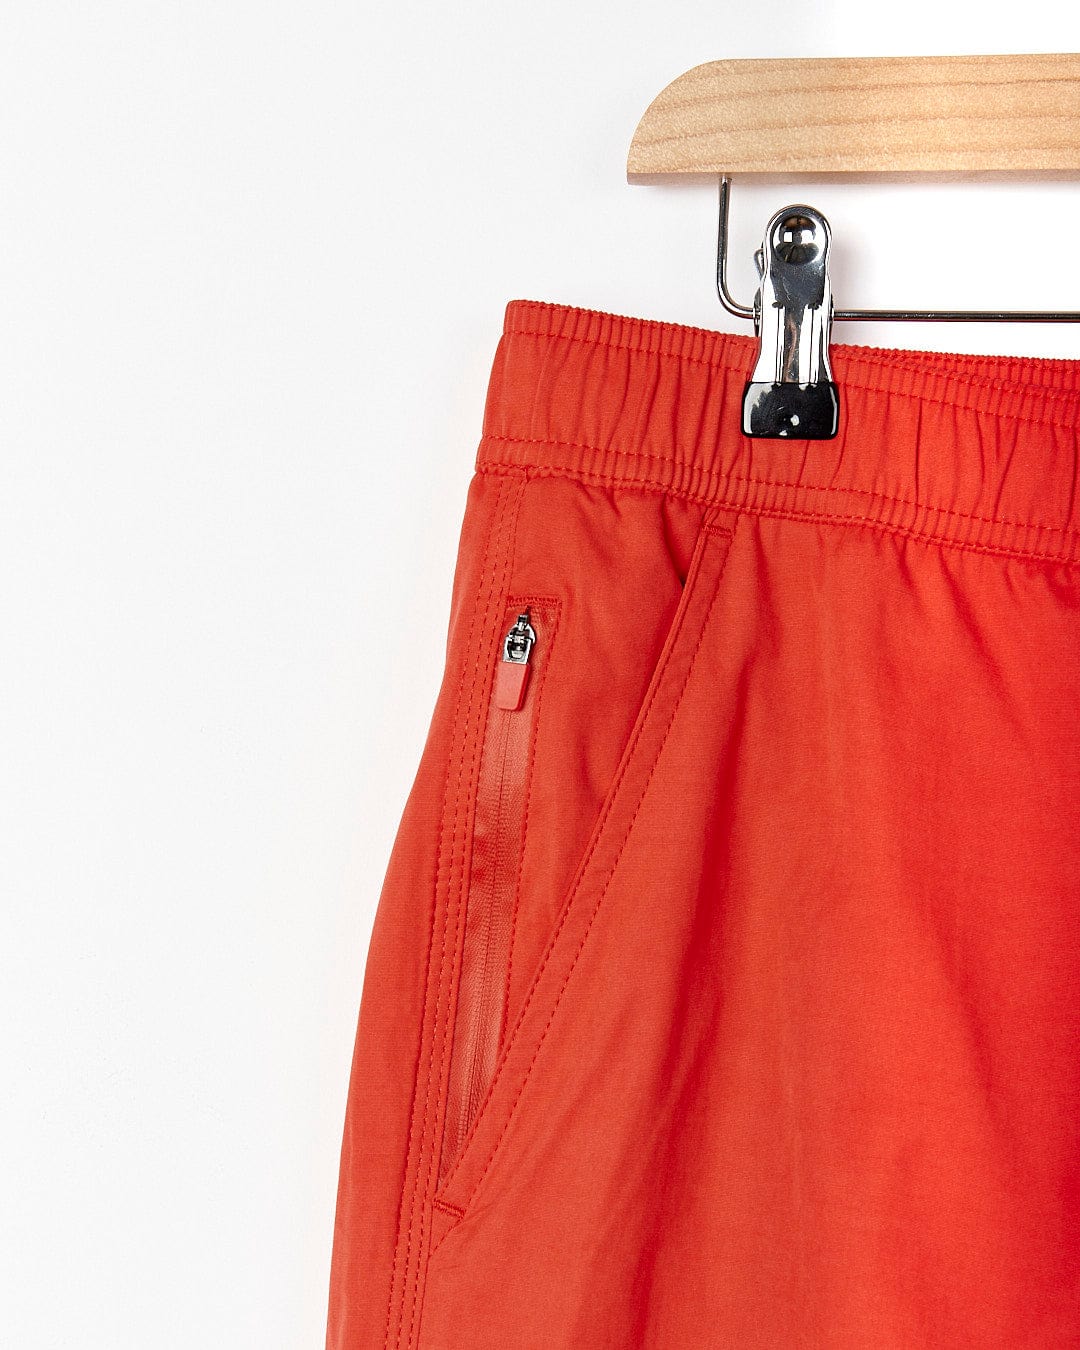 A pair of Saltrock - Lee Mens Sueded Volley Swimshort - Red hanging on a hanger.